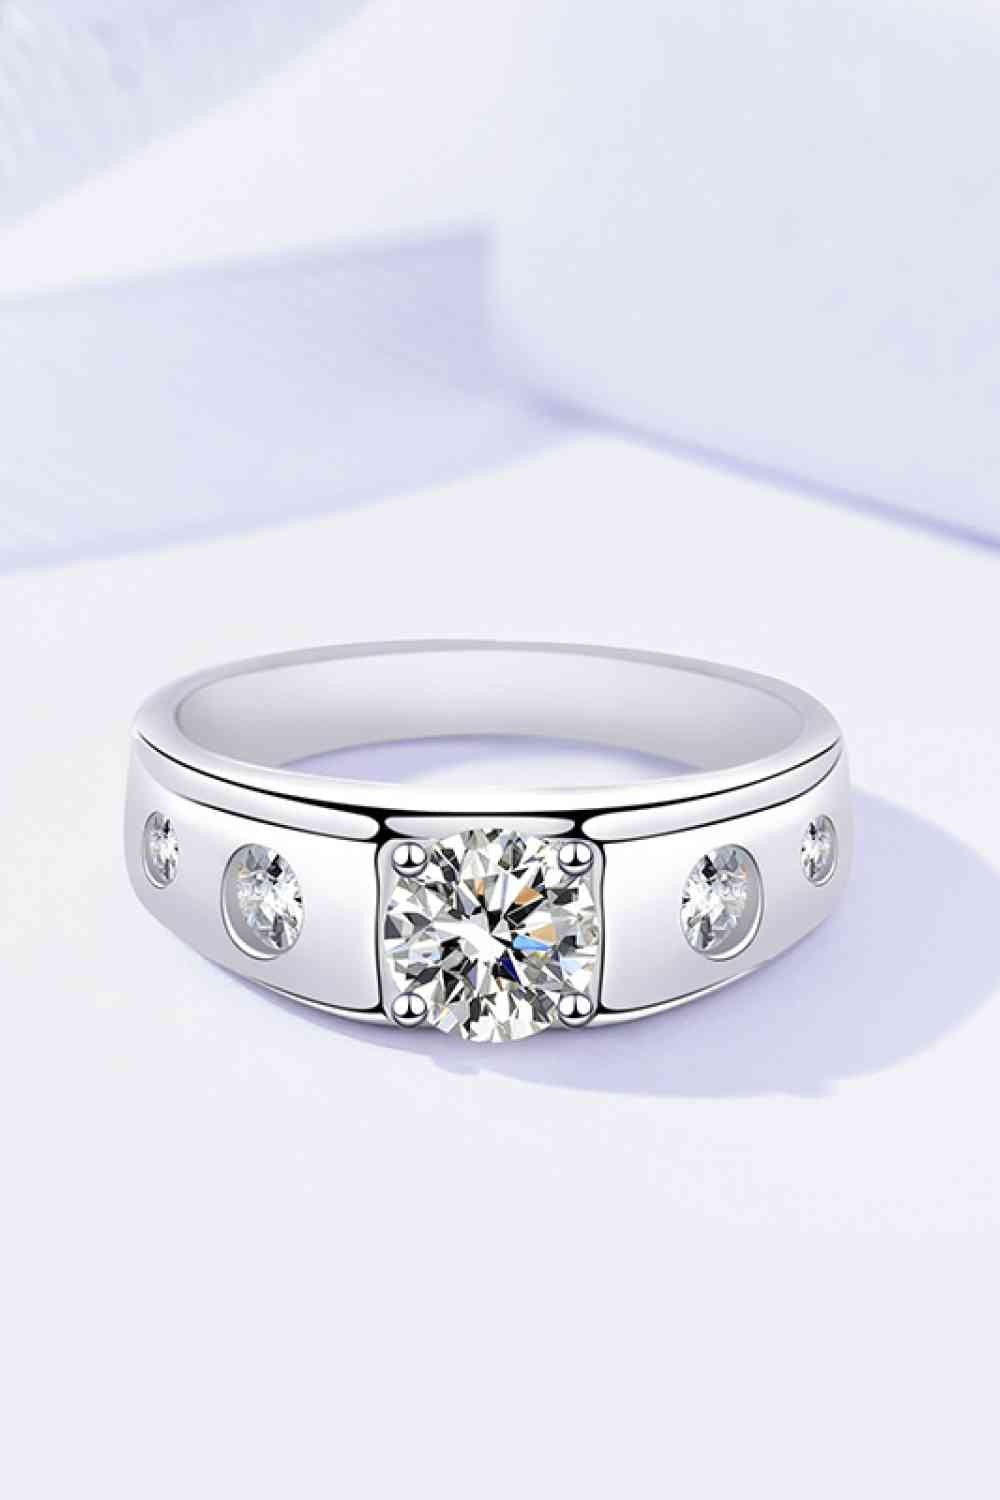 Moissanite 1 Ct - 925 Sterling Silver Ring